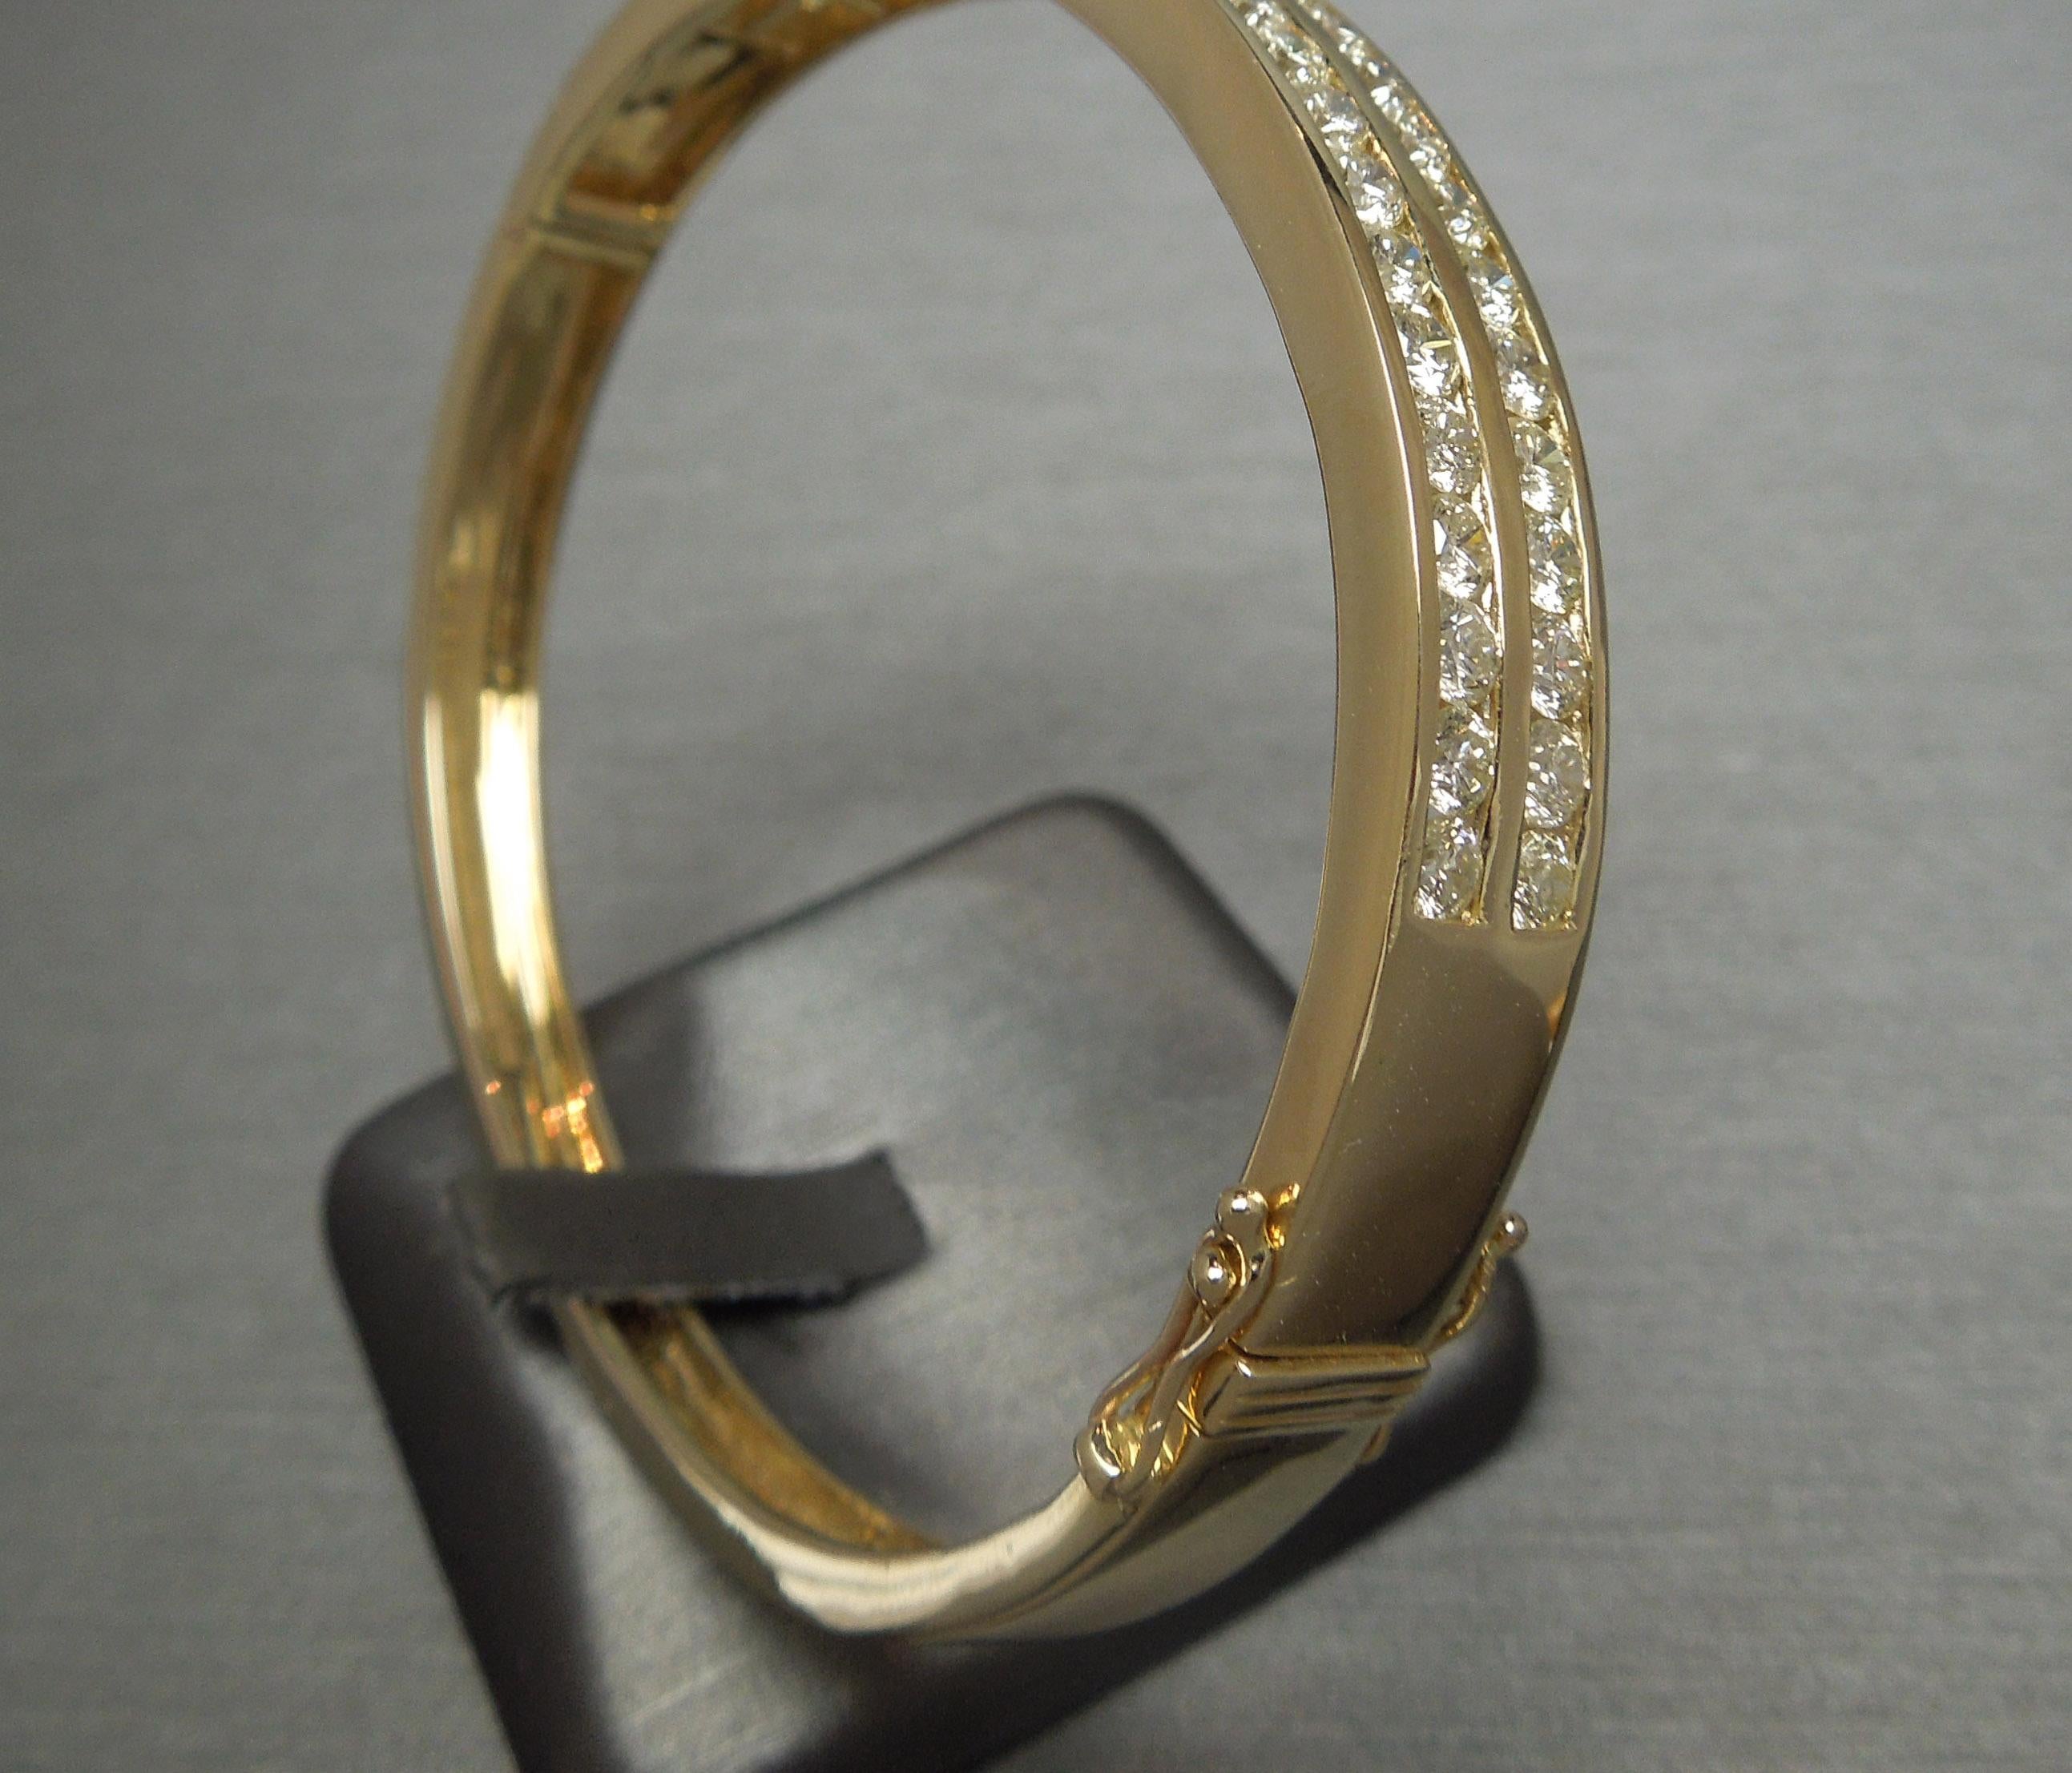 This 14 Karat Yellow Gold Diamond Bangle Bracelet features 44 Nearly Flawless to Slightly Included Round Brilliant cut Diamonds totaling 5 carats ranking a J-K Color & VVS2-SI2 Clarity Channel set in a Double Row timeless, geometric design .. [Most